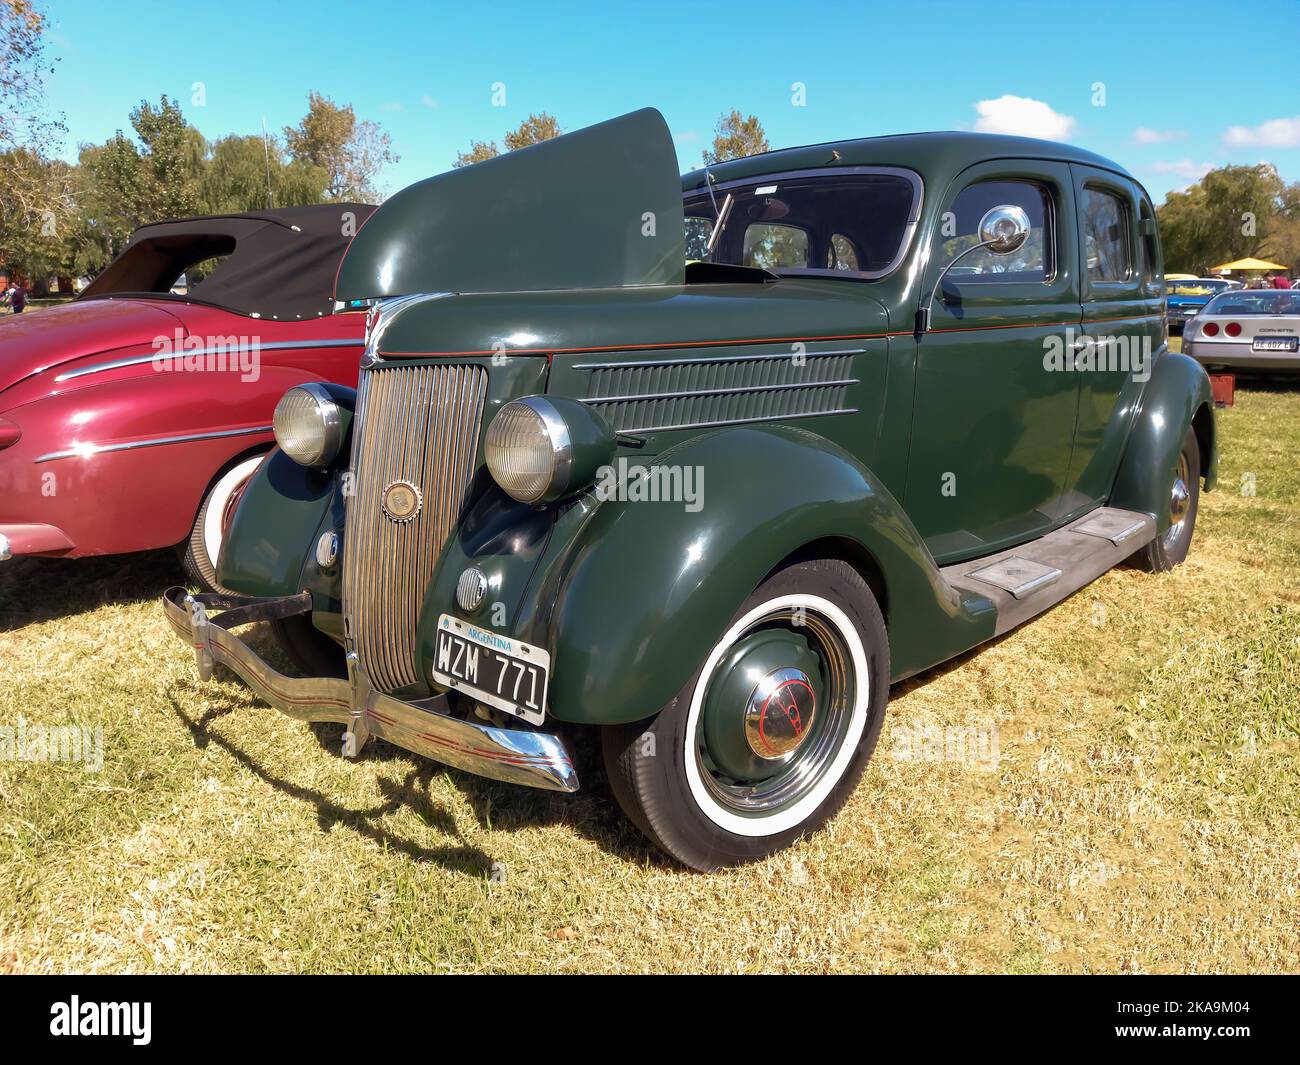 Chascomus, Argentina - Apr 9, 2022: Vintage green Ford Model 48 V8 Fordor sedan 1936 in the countryside. Nature, grass, trees. Classic car show. Stock Photo